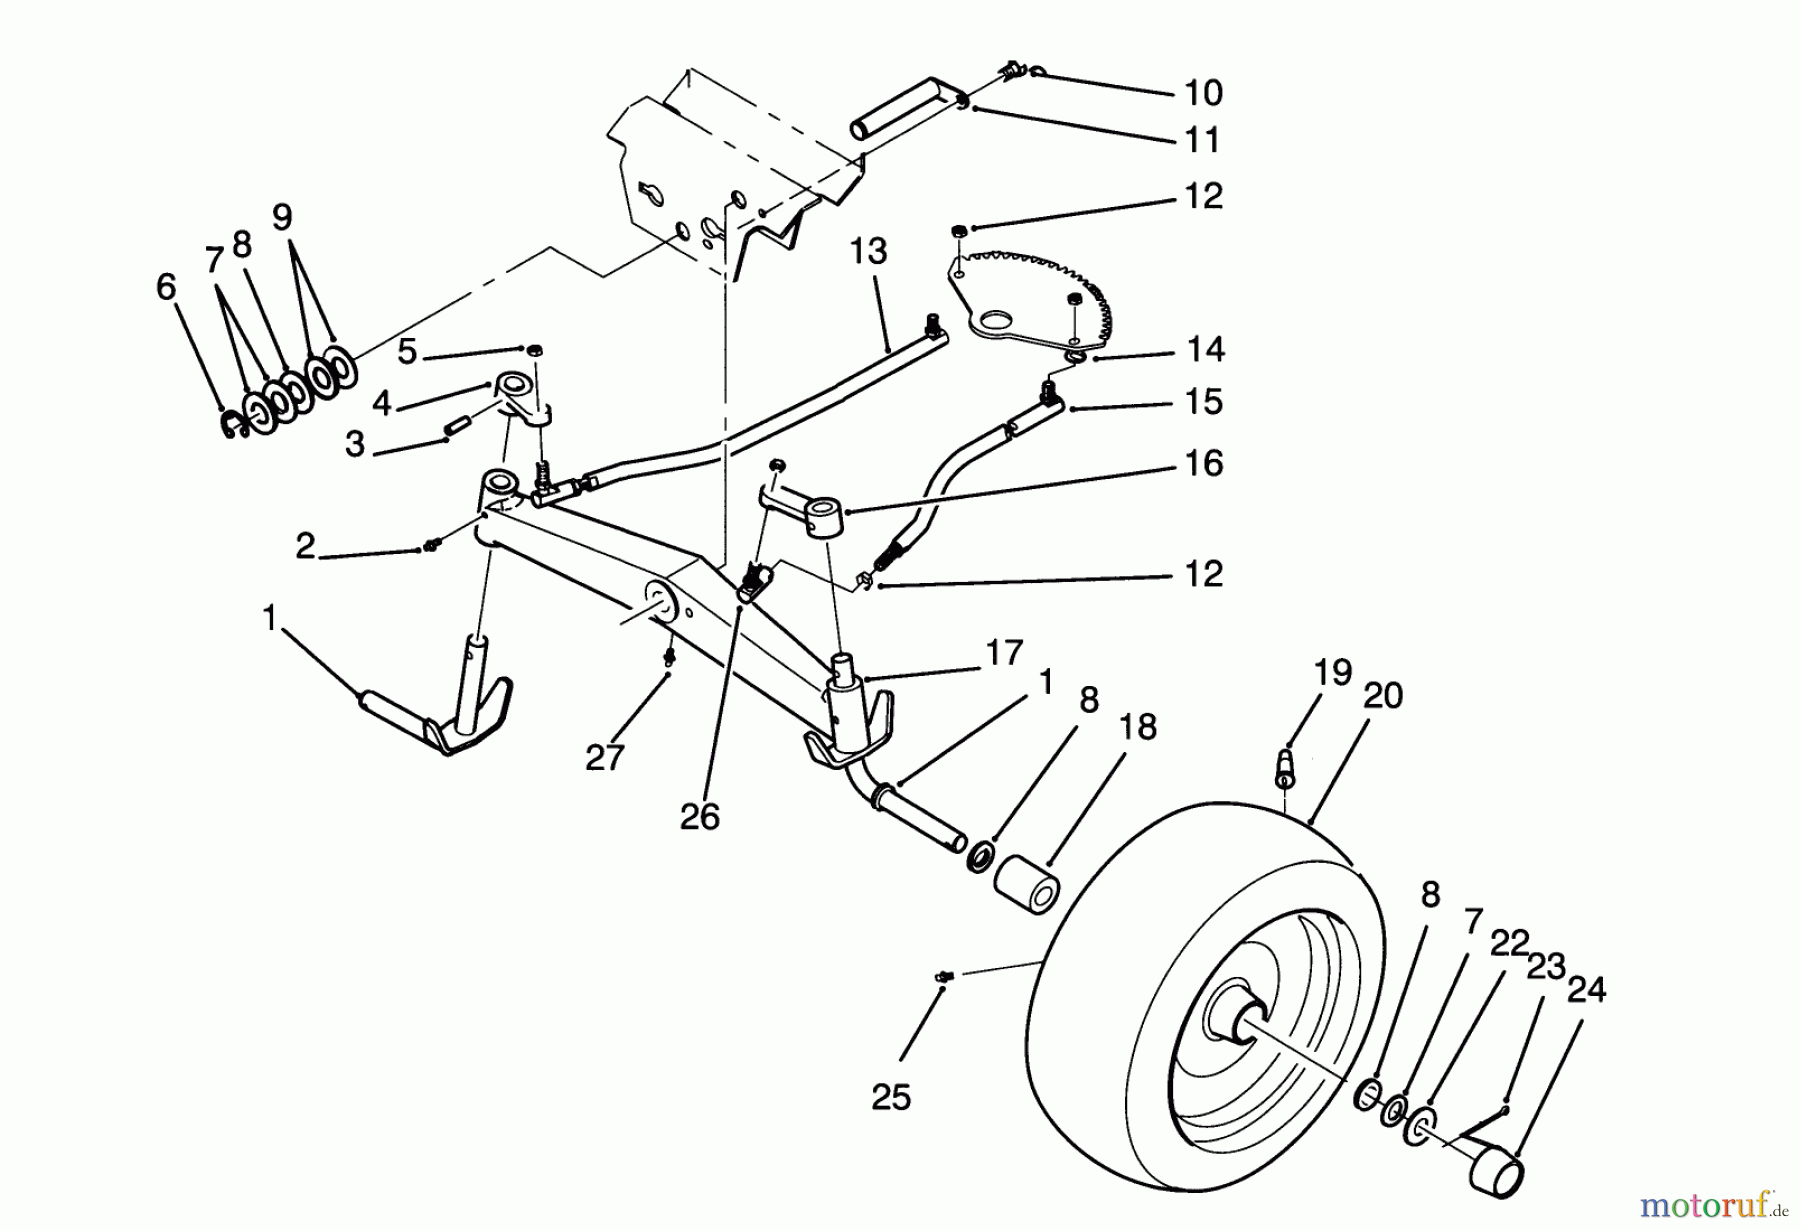  Toro Neu Mowers, Lawn & Garden Tractor Seite 1 72081 (246-H) - Toro 246-H Yard Tractor, 1993 (3900001-3999999) FRONT AXLE ASSEMBLY